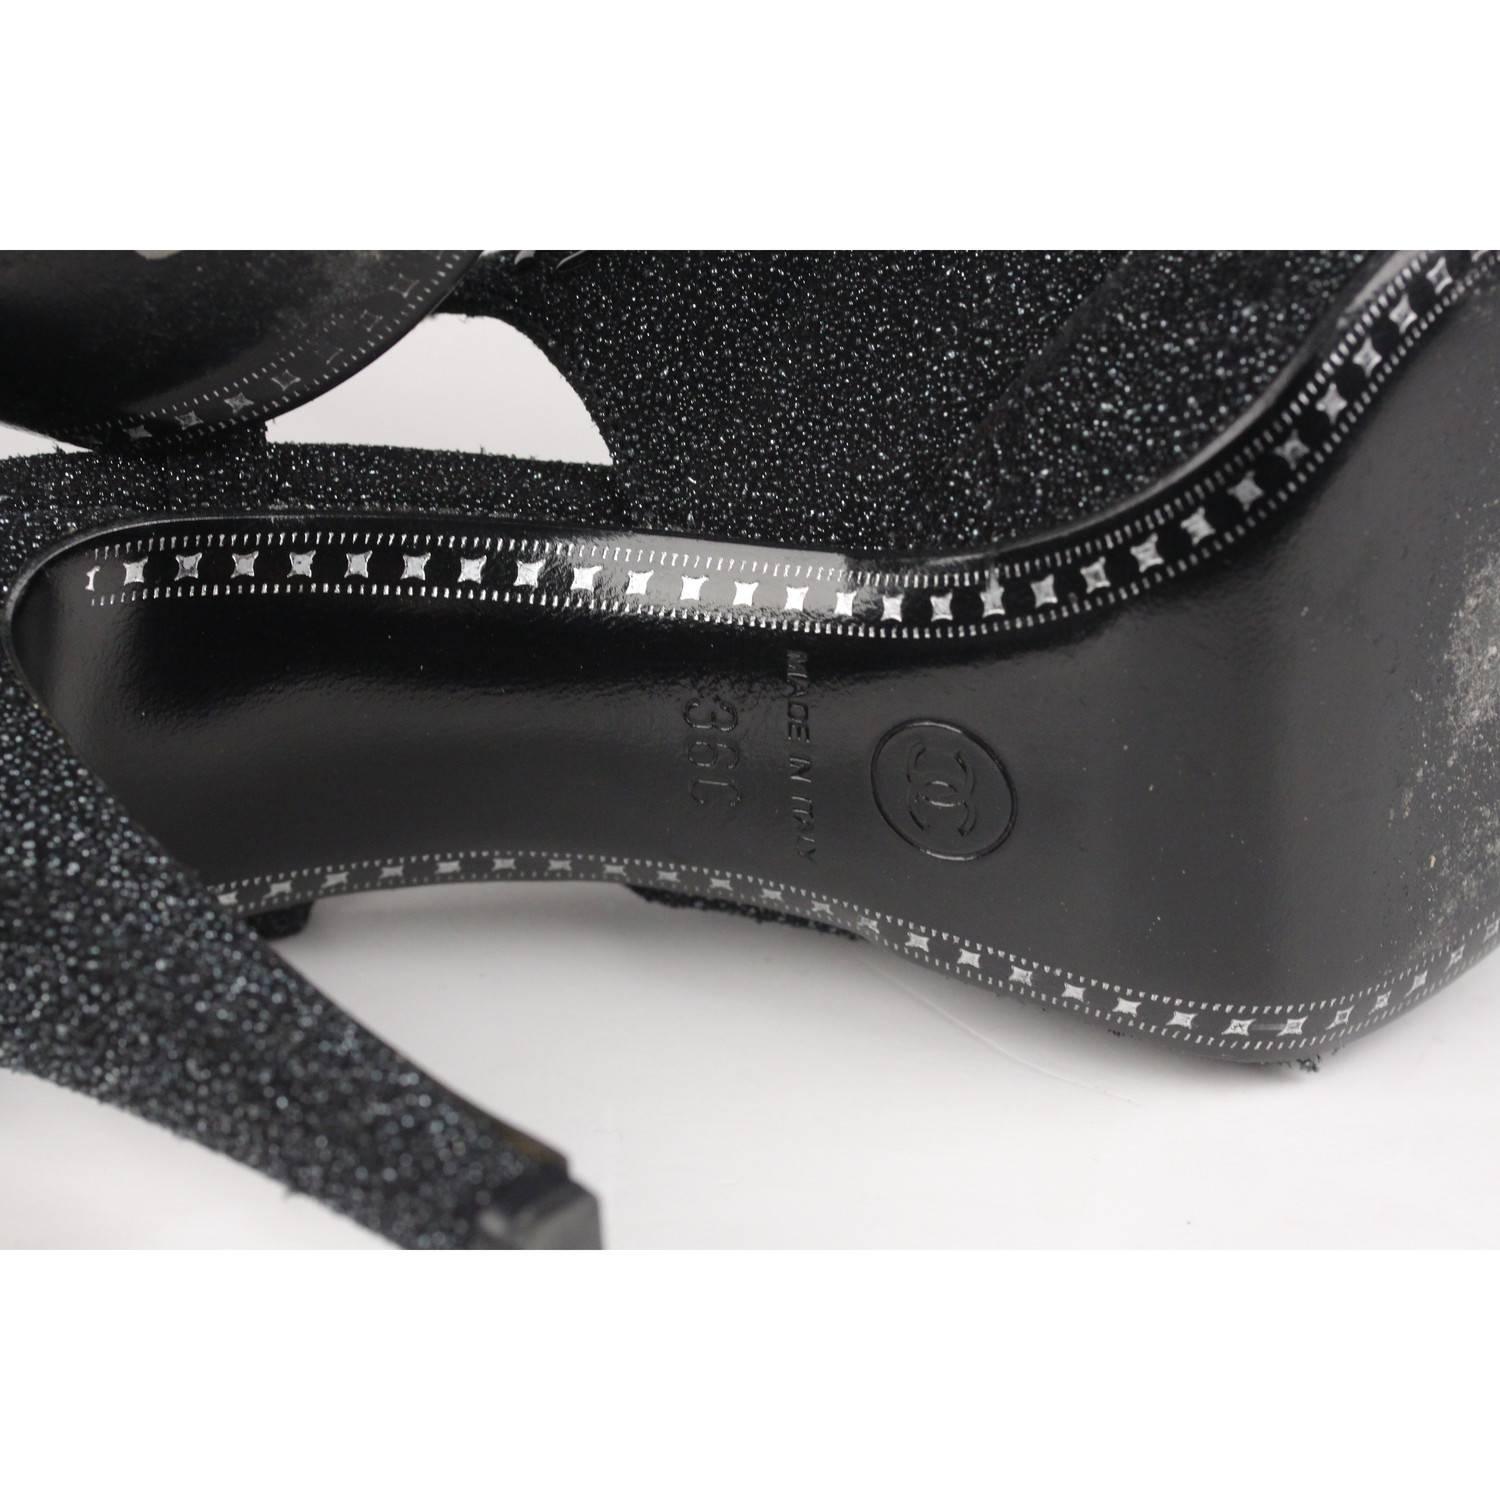 - Chanel platform slingback pumps in black and grey with glitter effect
- Double C logo 
- Round Cap-toe
- Buckle closure 
- Platform
- Heels height 4.5 inches - 11,5 cm 
- Size 36 C 
- Made in Italy